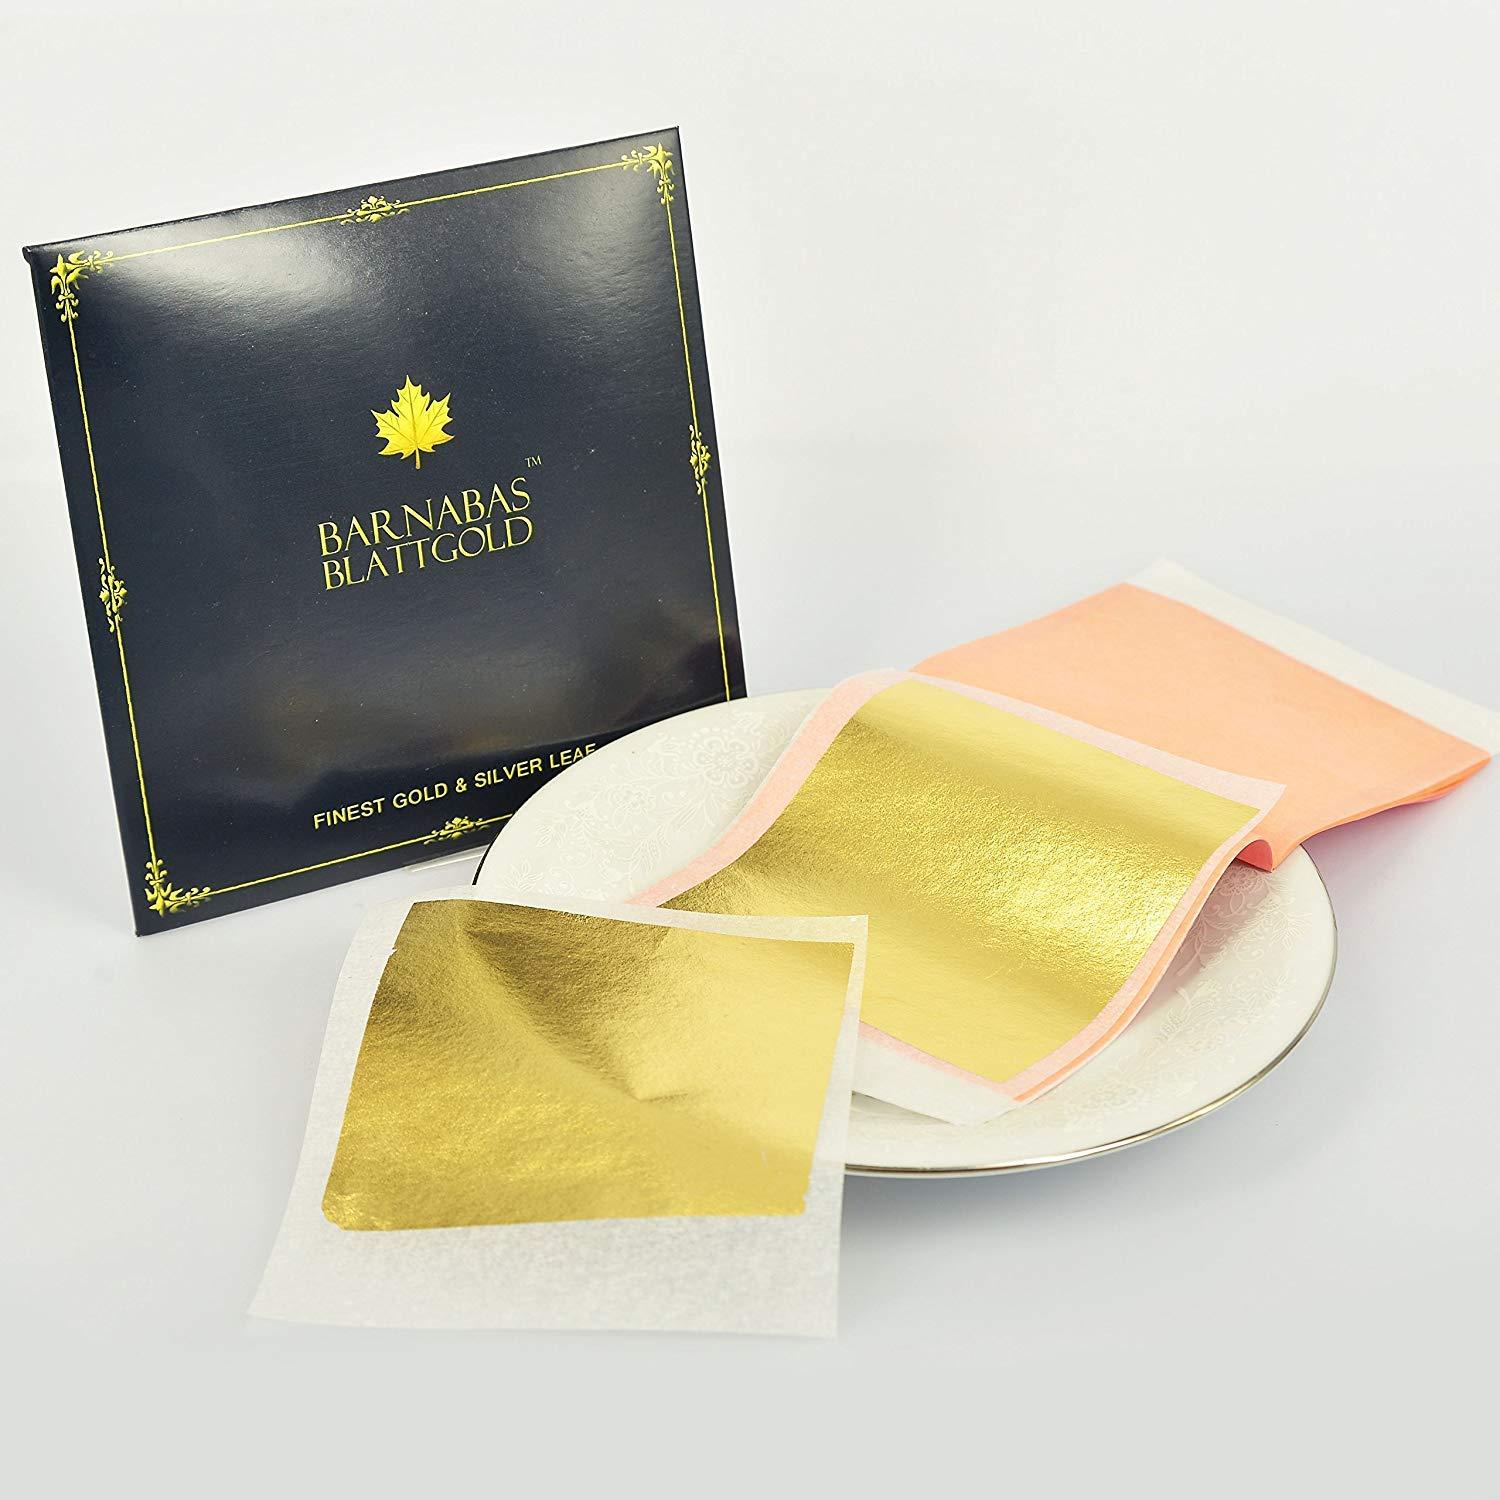 Edible Genuine Gold Leaf Sheets - by Barnabas Blattgold - 3.1 inches  Booklet of 10 Sheets - Transfer Patent Leaf 3.1 Inch (Pack of 10)